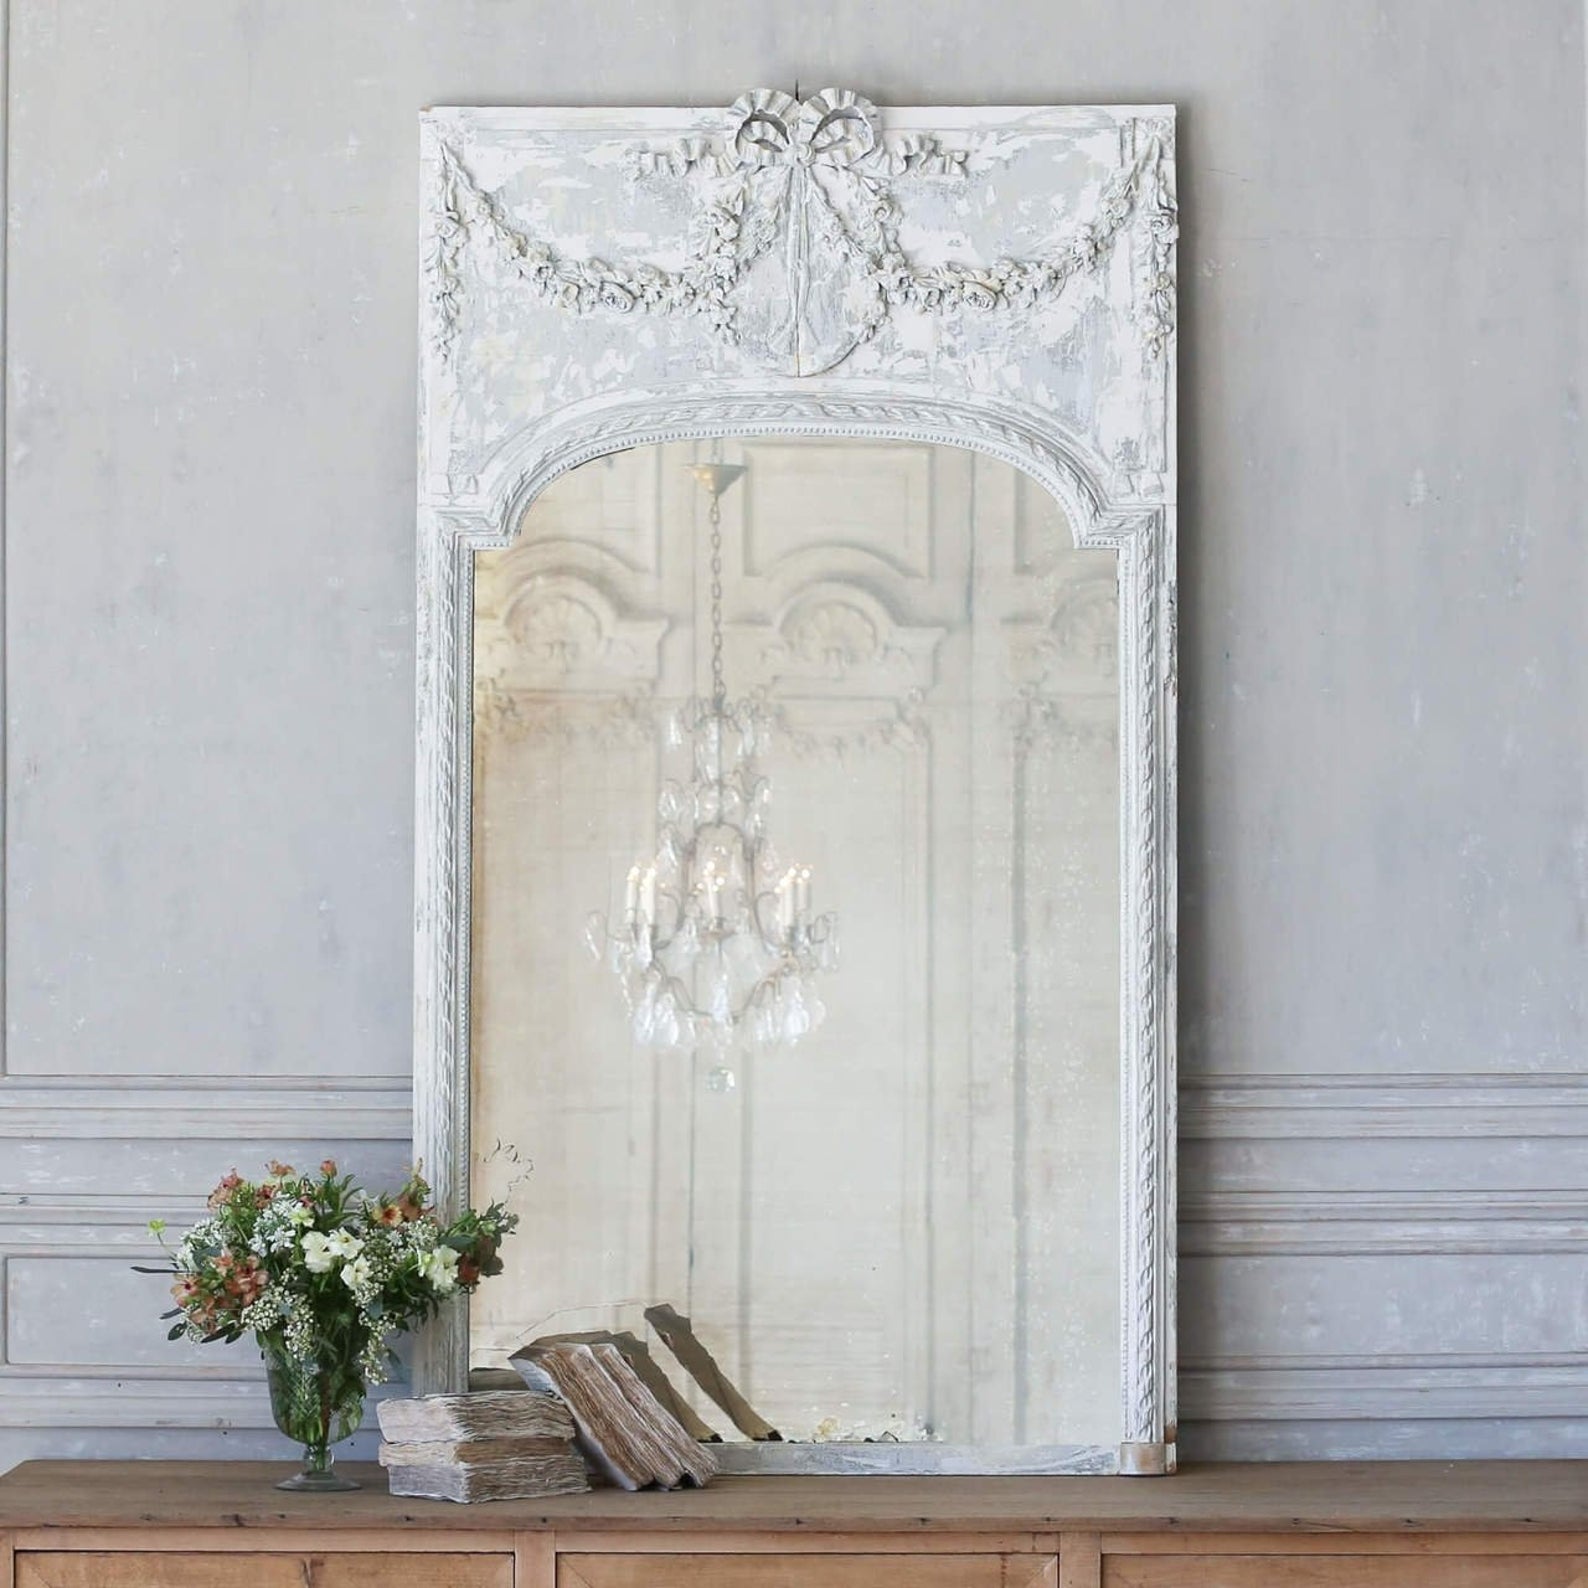 10 Beautiful French Country Style Mirrors